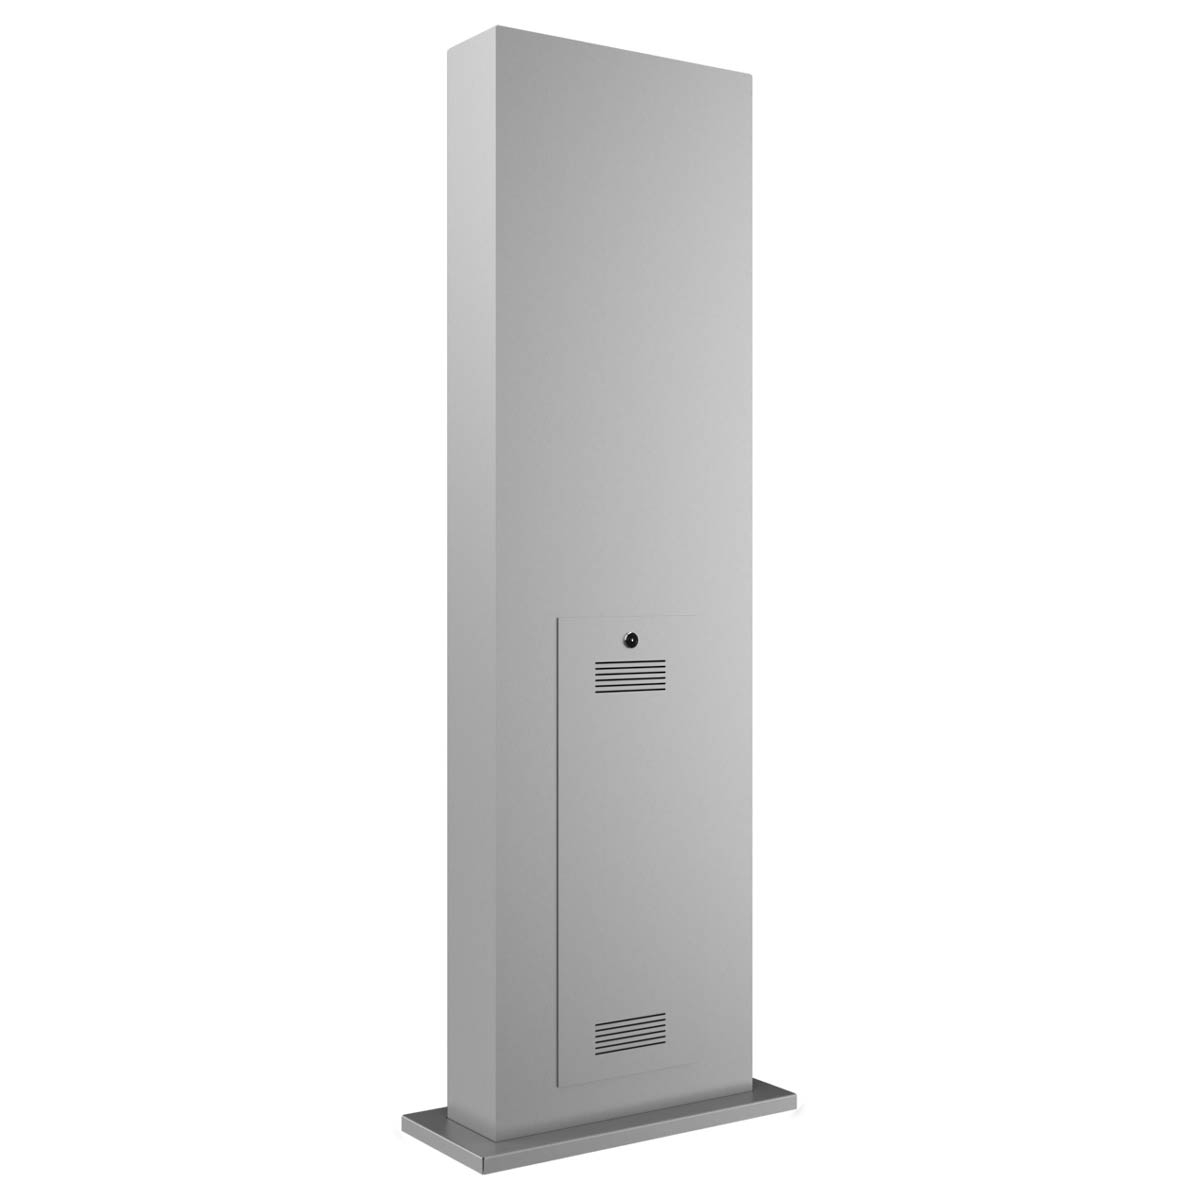 Ladesäule Close BASIC Charge 1X - 22kW/32A mit Typ 2 Ladekabel